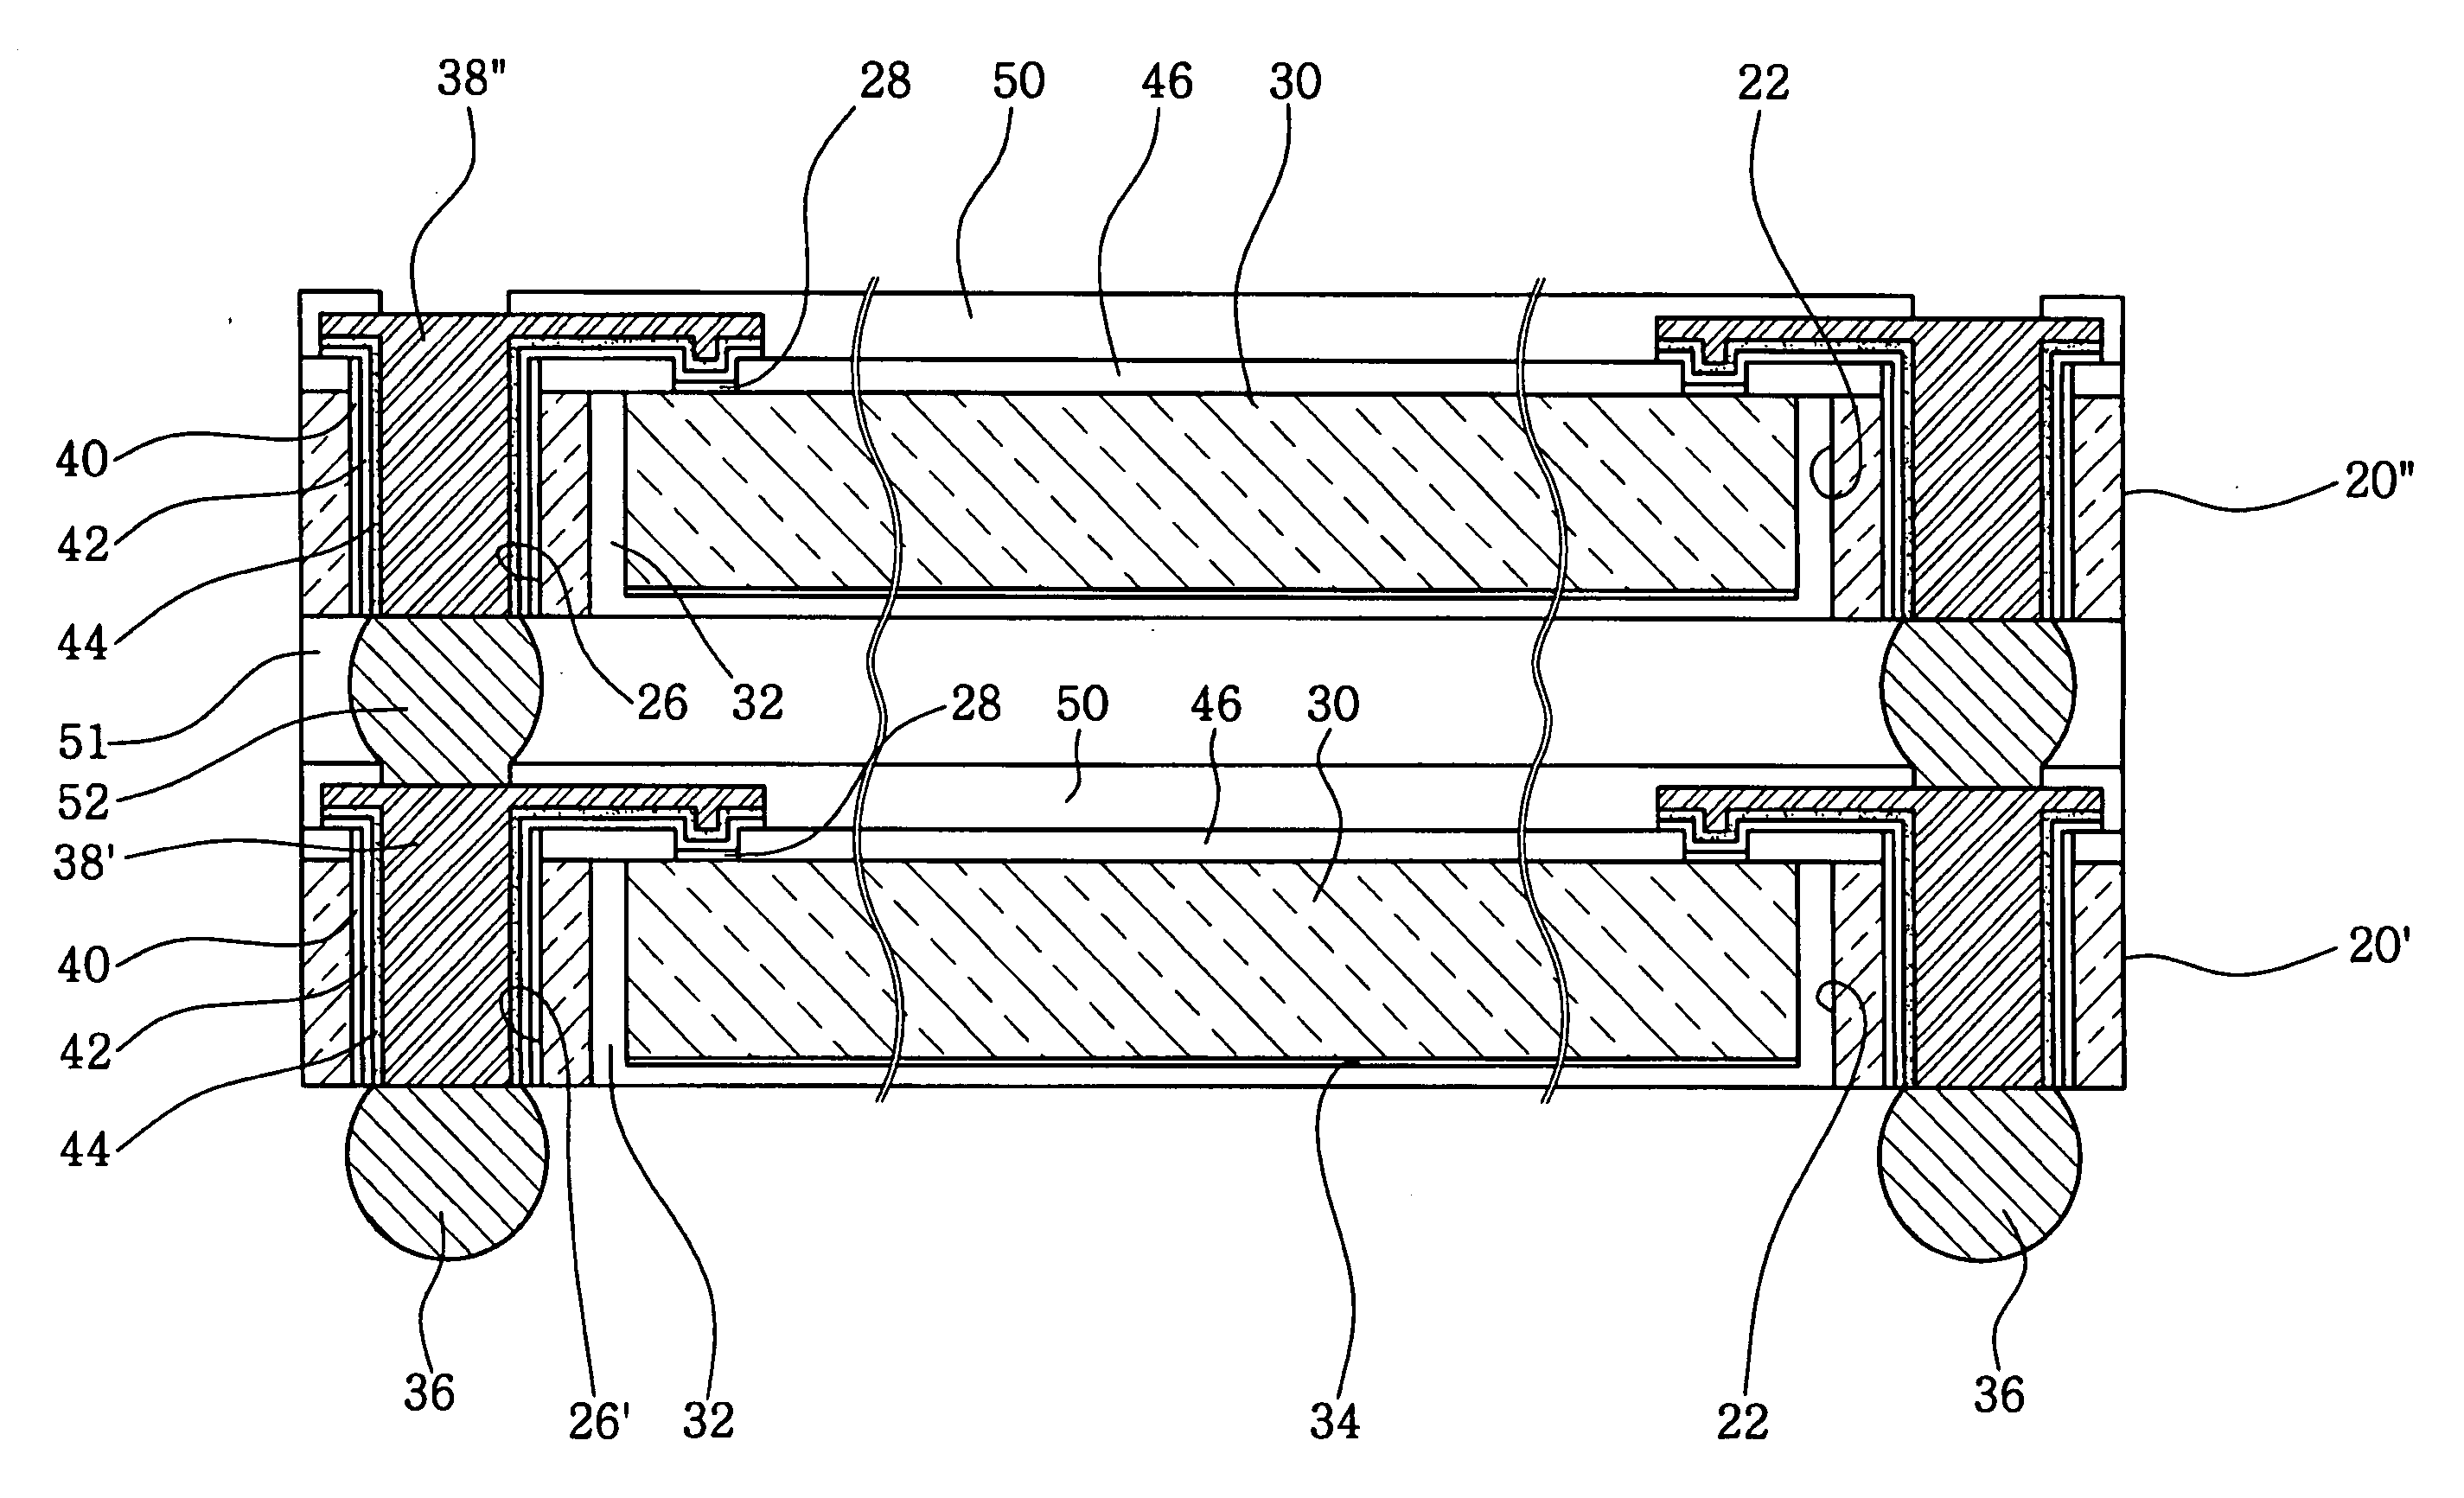 Semiconductor package having a semiconductor chip in a substrate and method of fabricating the same